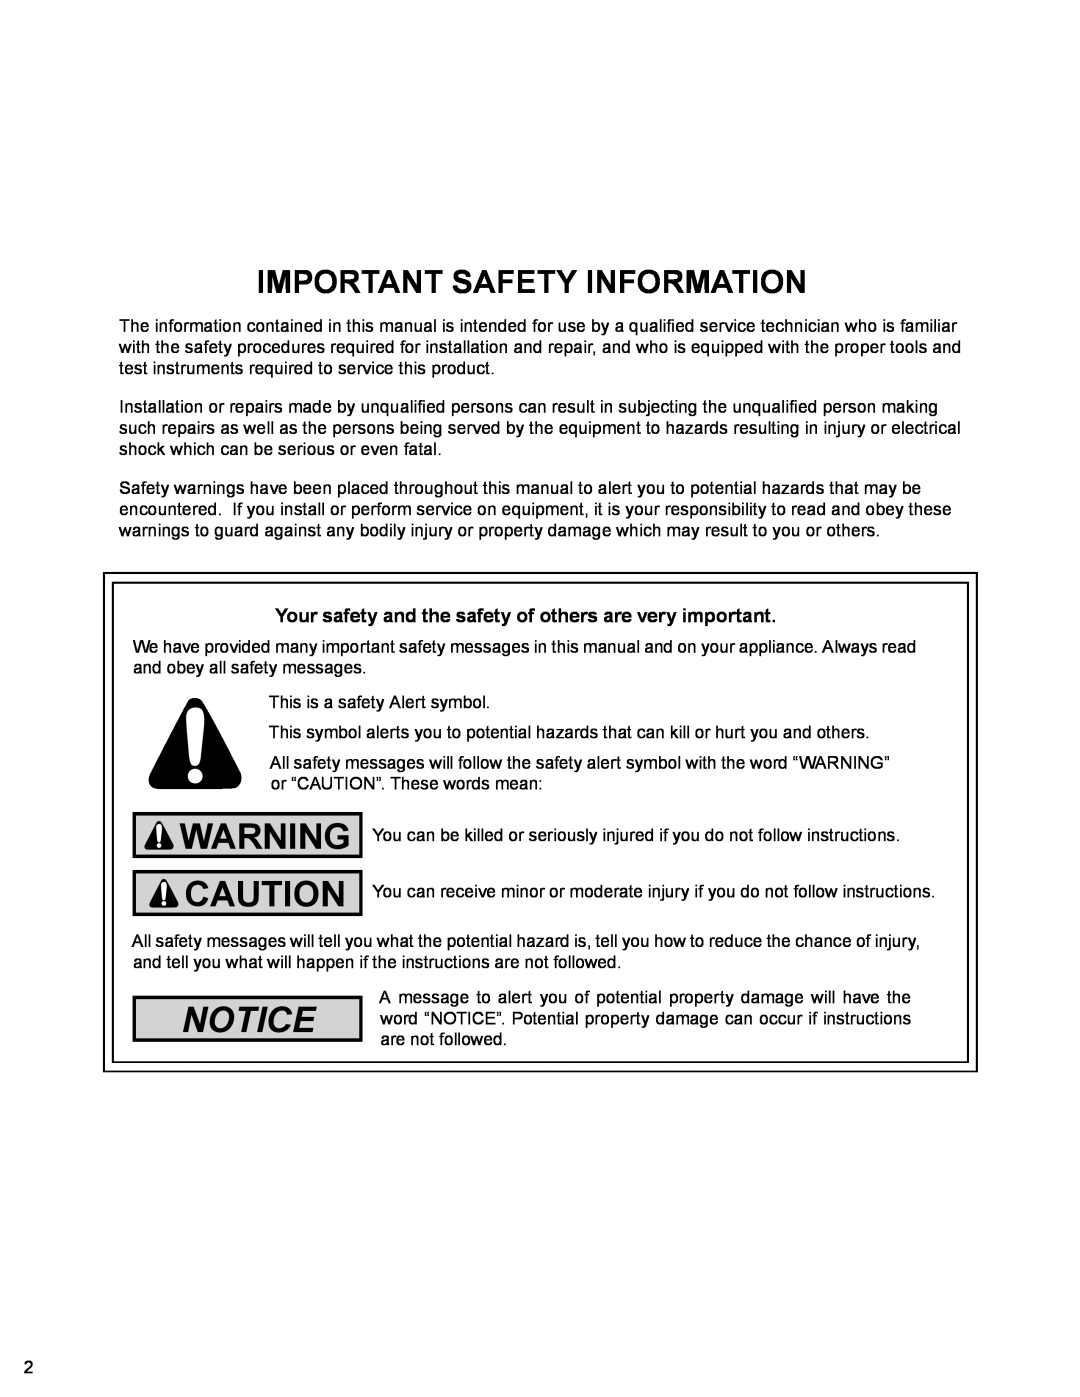 Friedrich PTAC - R410A service manual Important Safety Information, Notice 